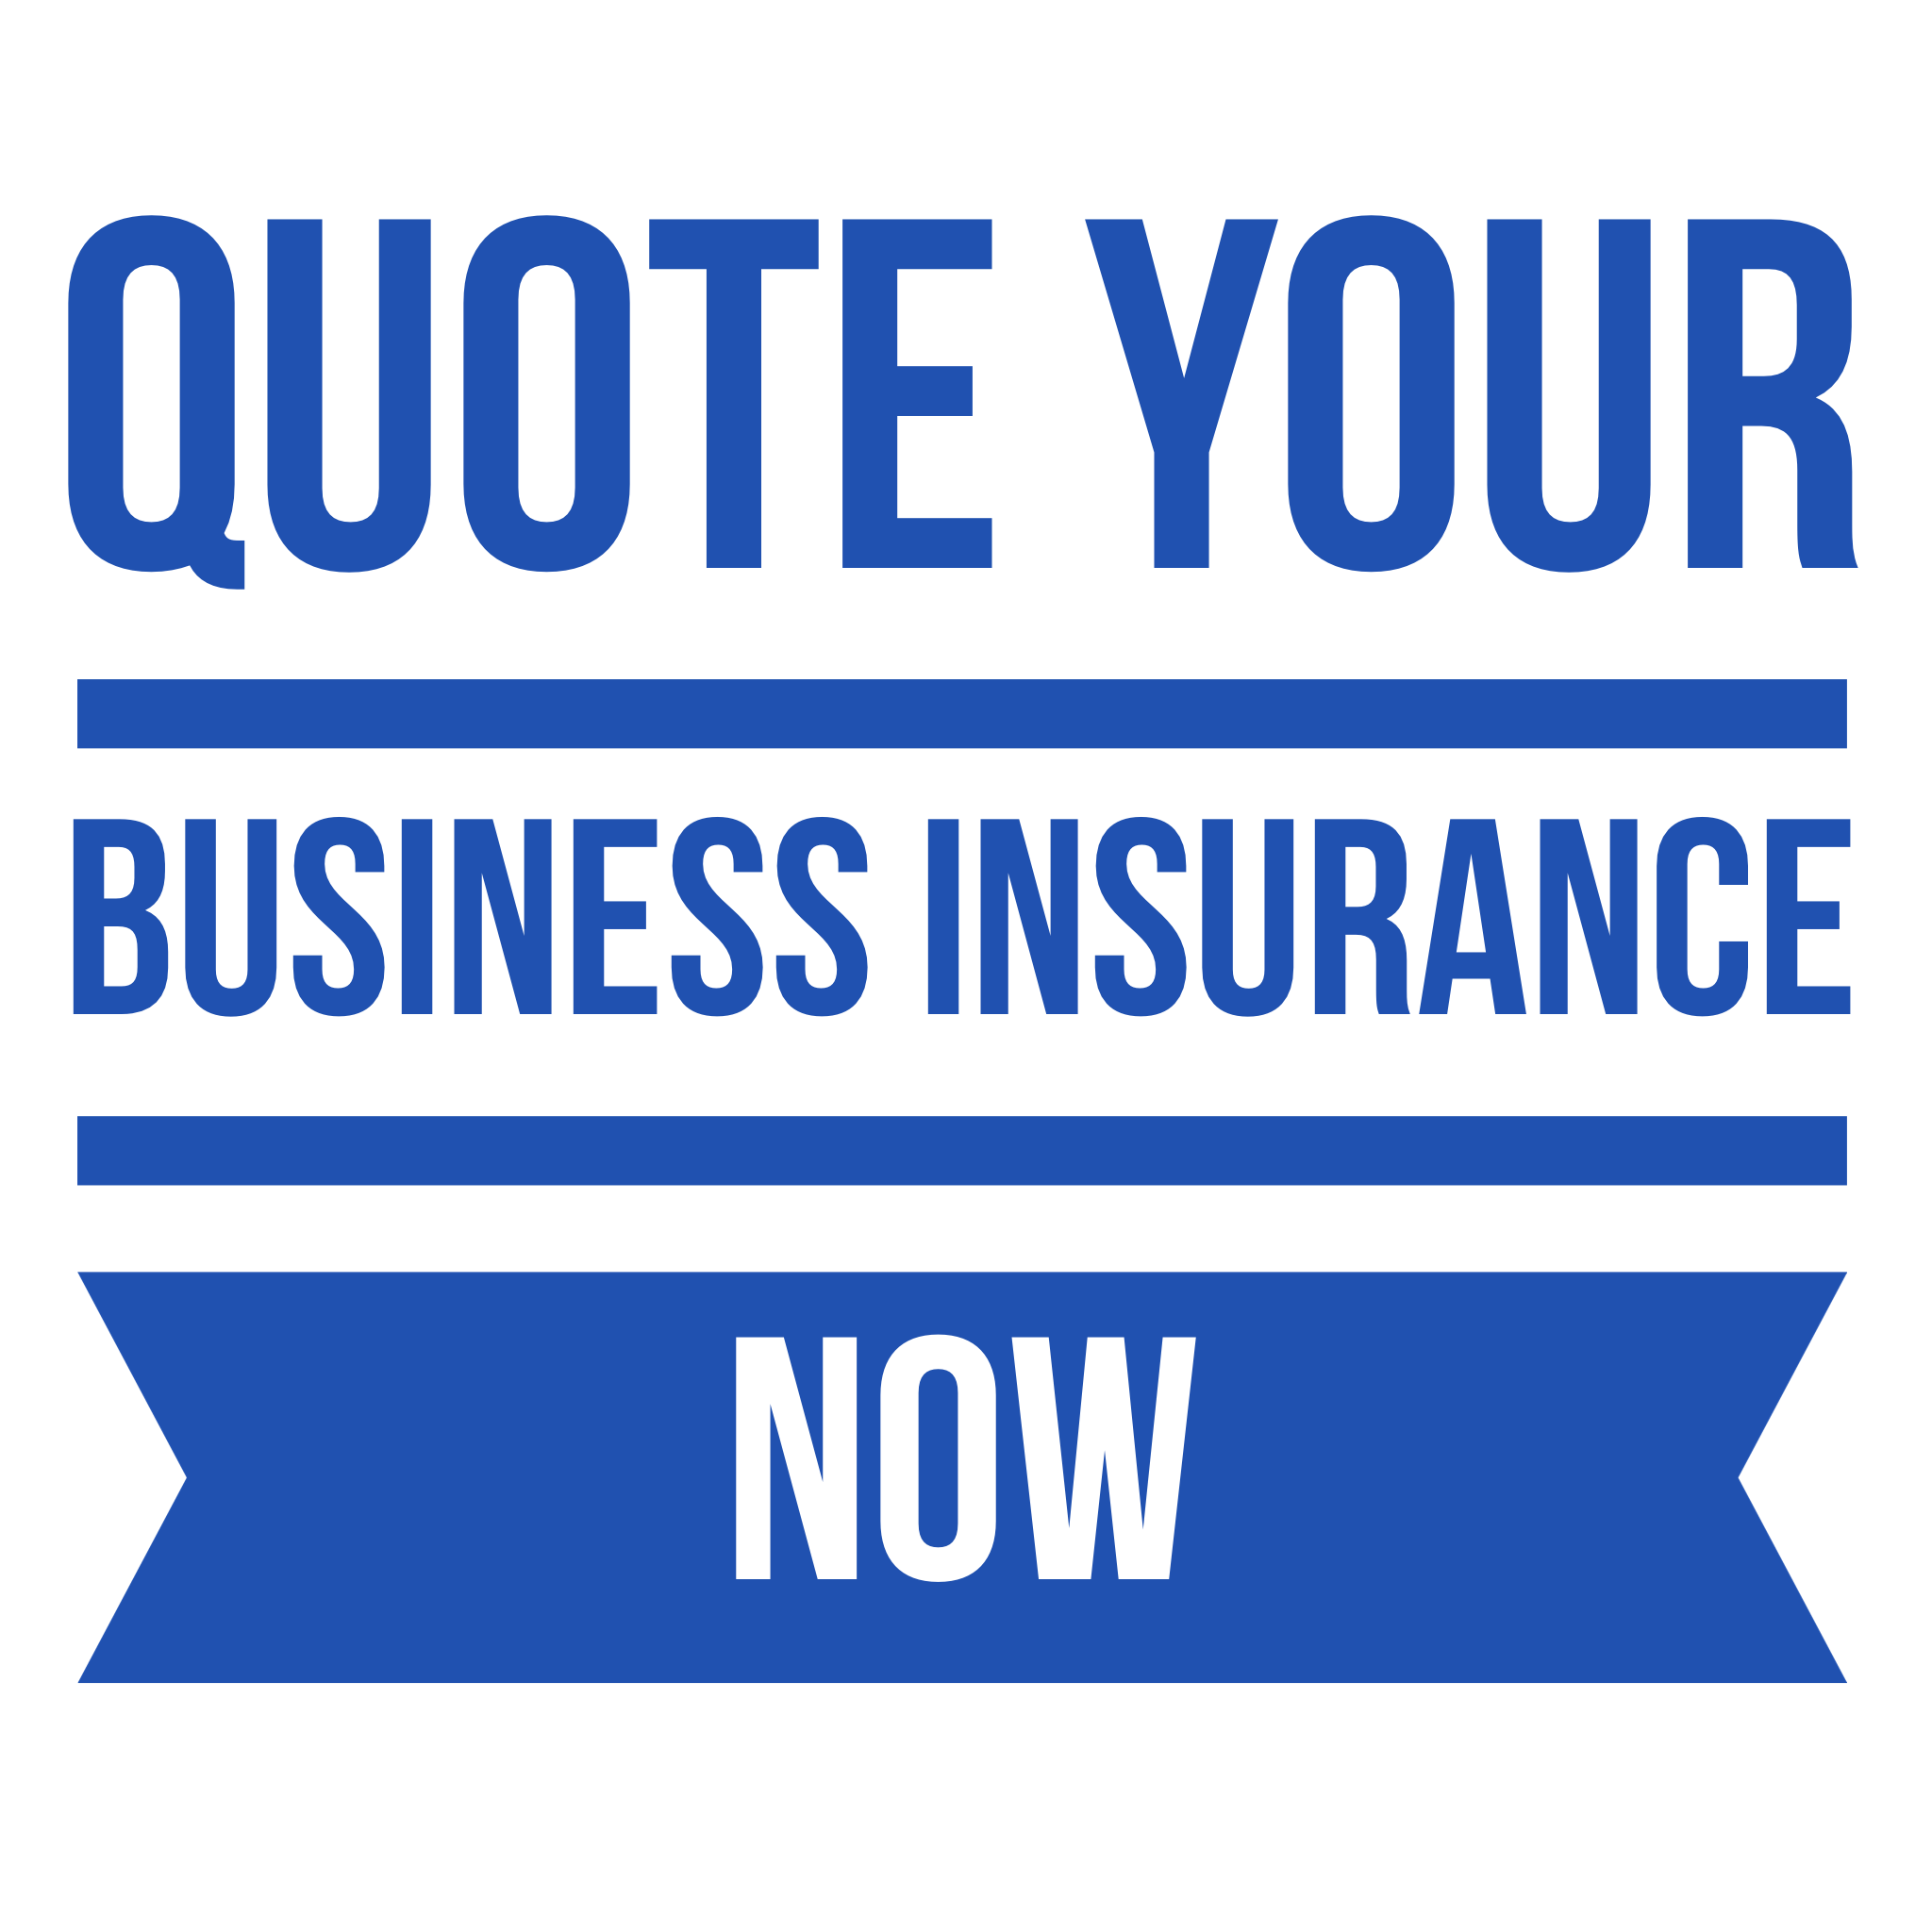 Get a Business Insurance Quote